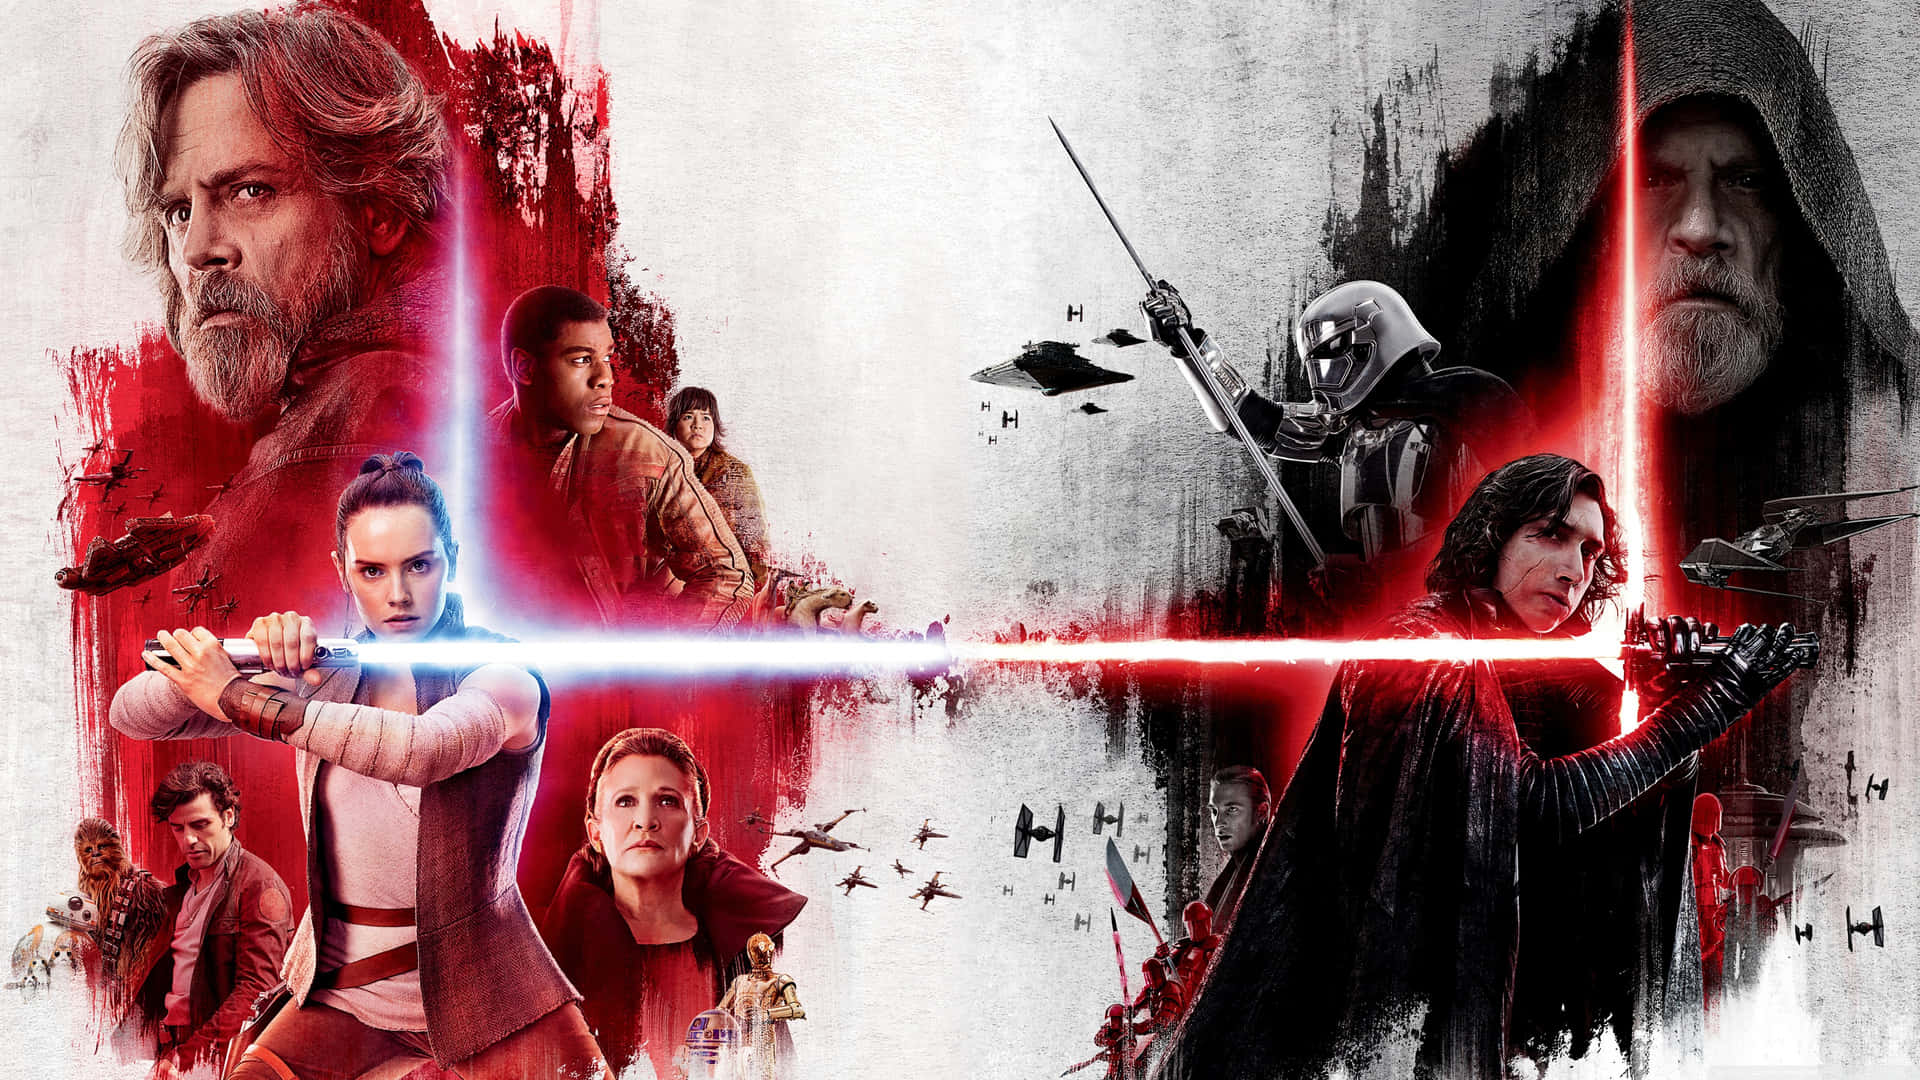 Master the Force as a Jedi Wallpaper